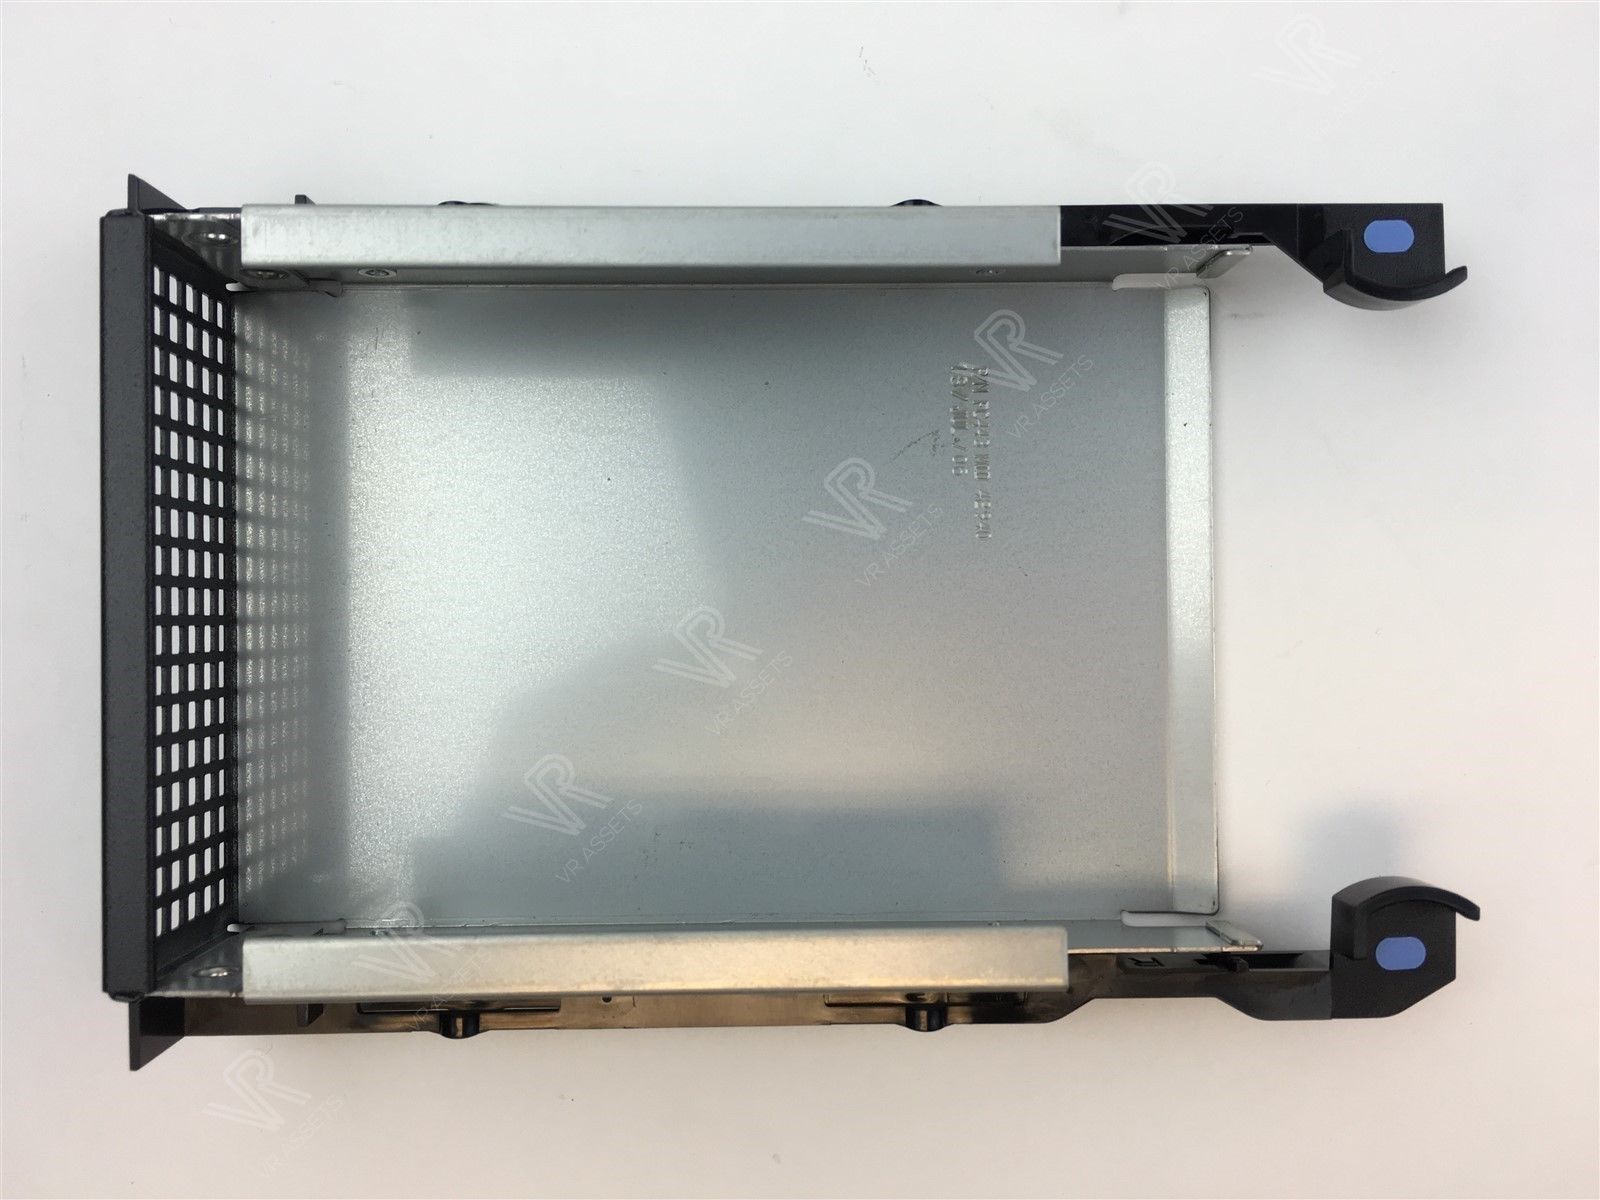 Genuine Dell PowerEdge 2950 Drive Filler Tray with Rails FC443 0FC443